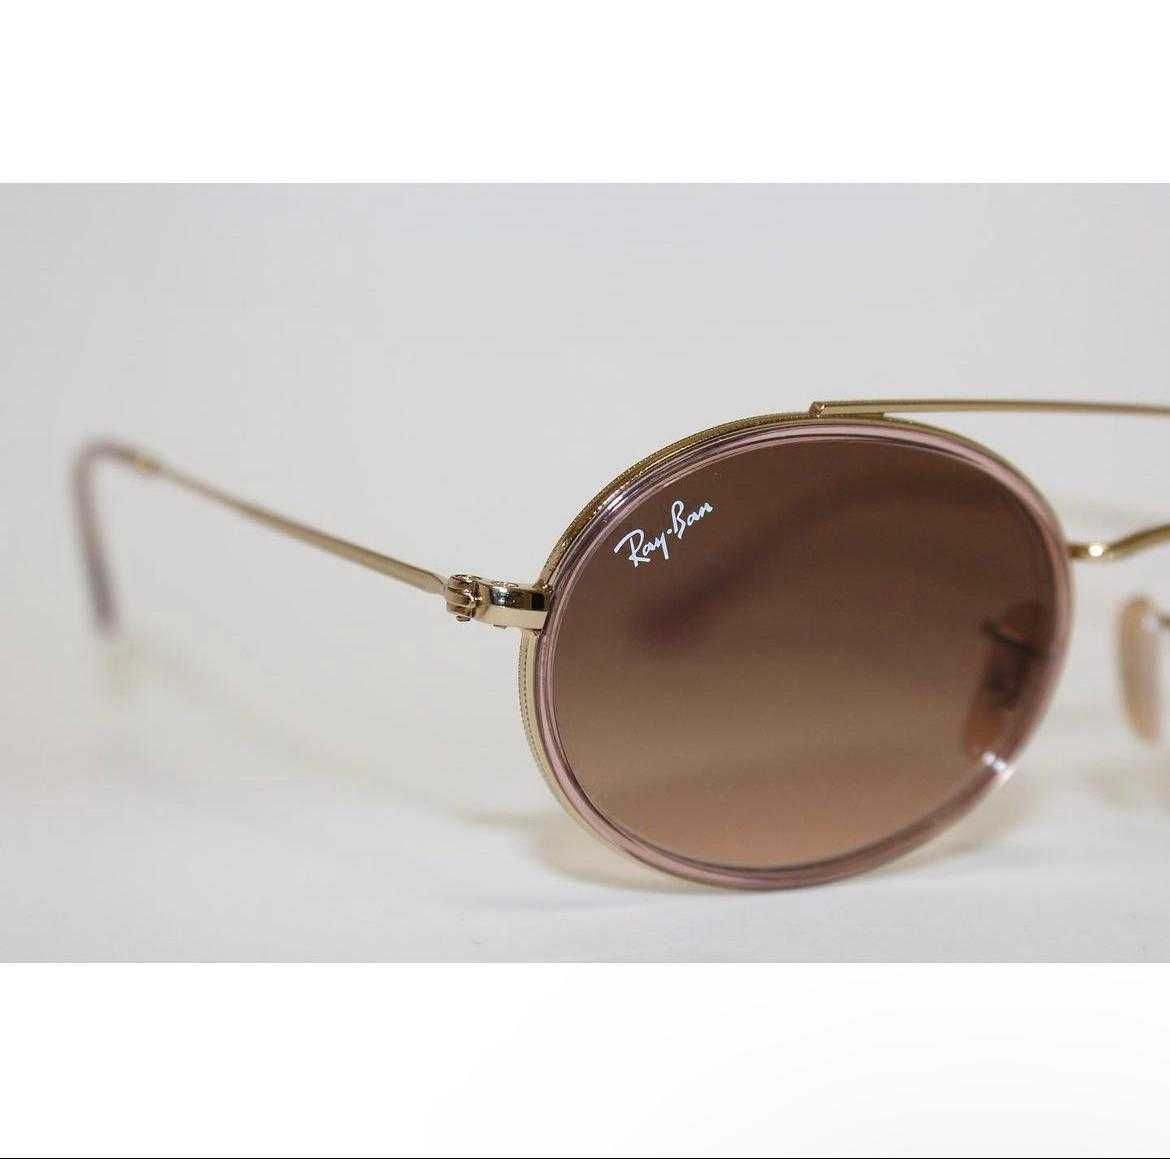 Ray-Ban Oval Double Bridge
Gold /Pink Brown Gradient